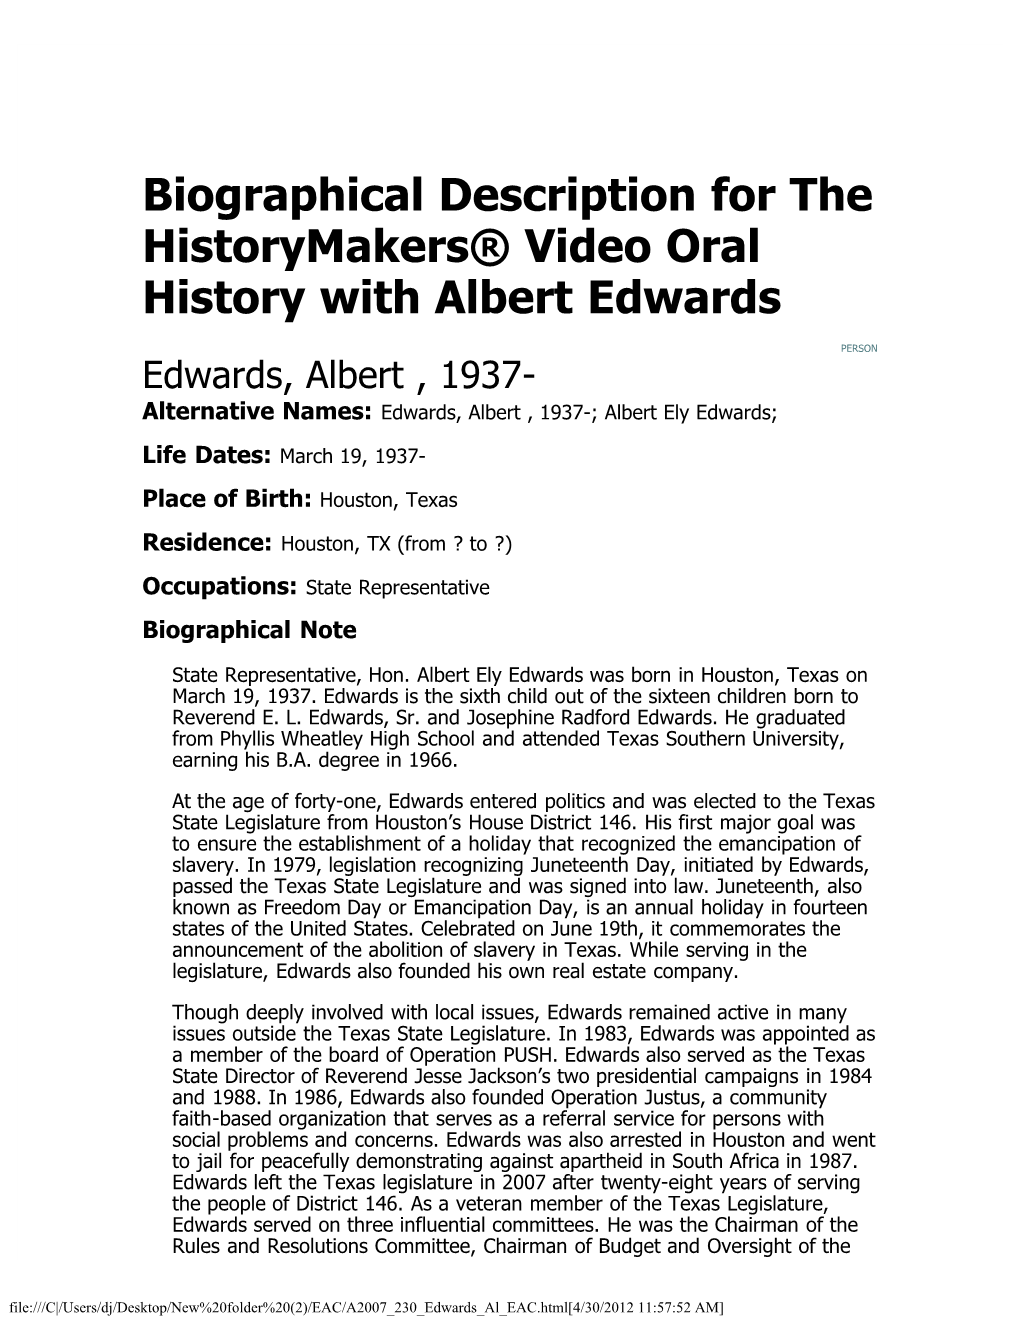 Biographical Description for the Historymakers® Video Oral History with Albert Edwards